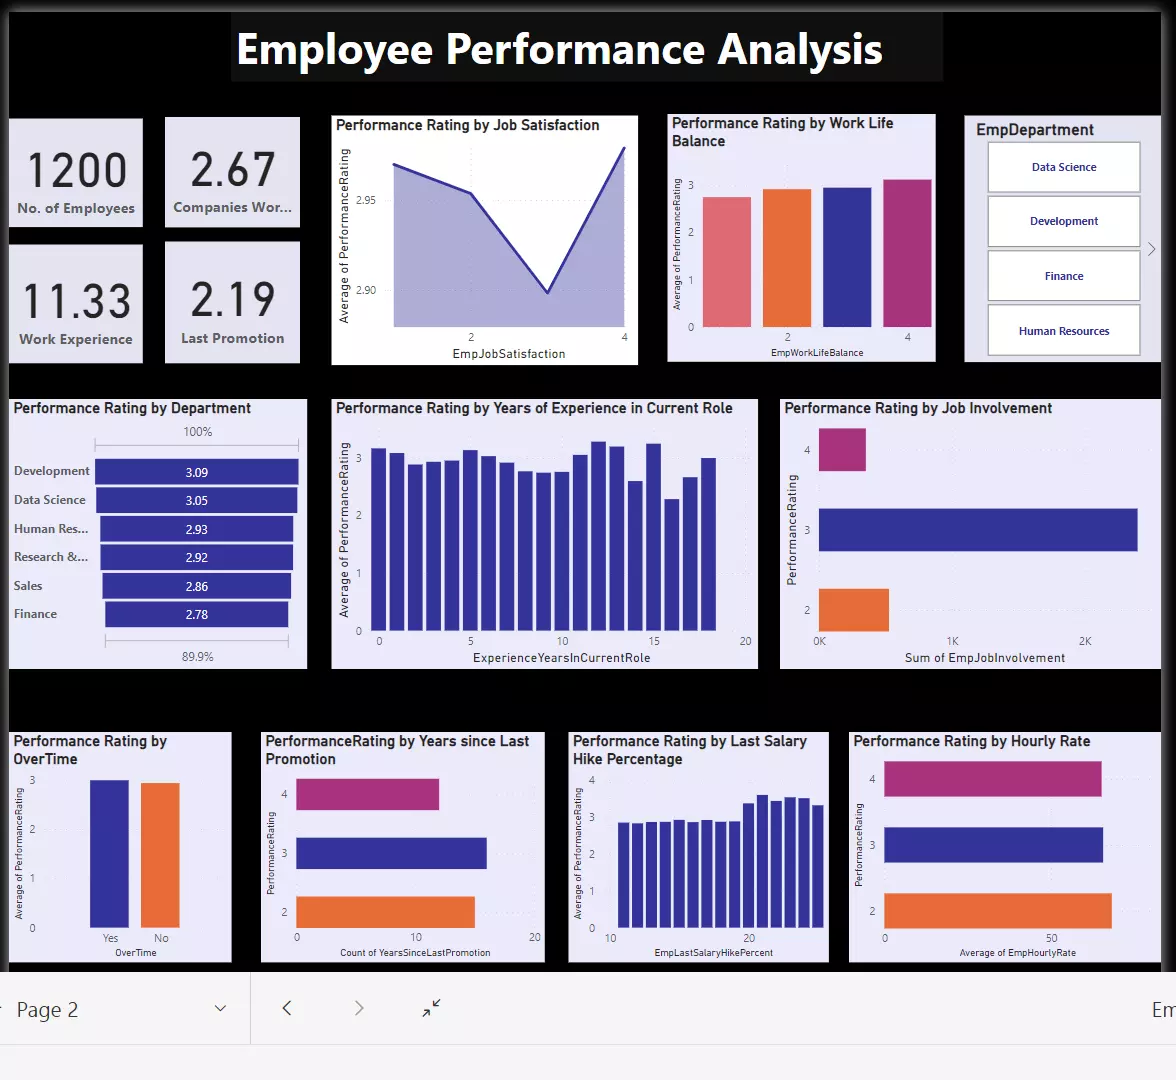 How Can We Analyze Employee Performance Data with Excel?